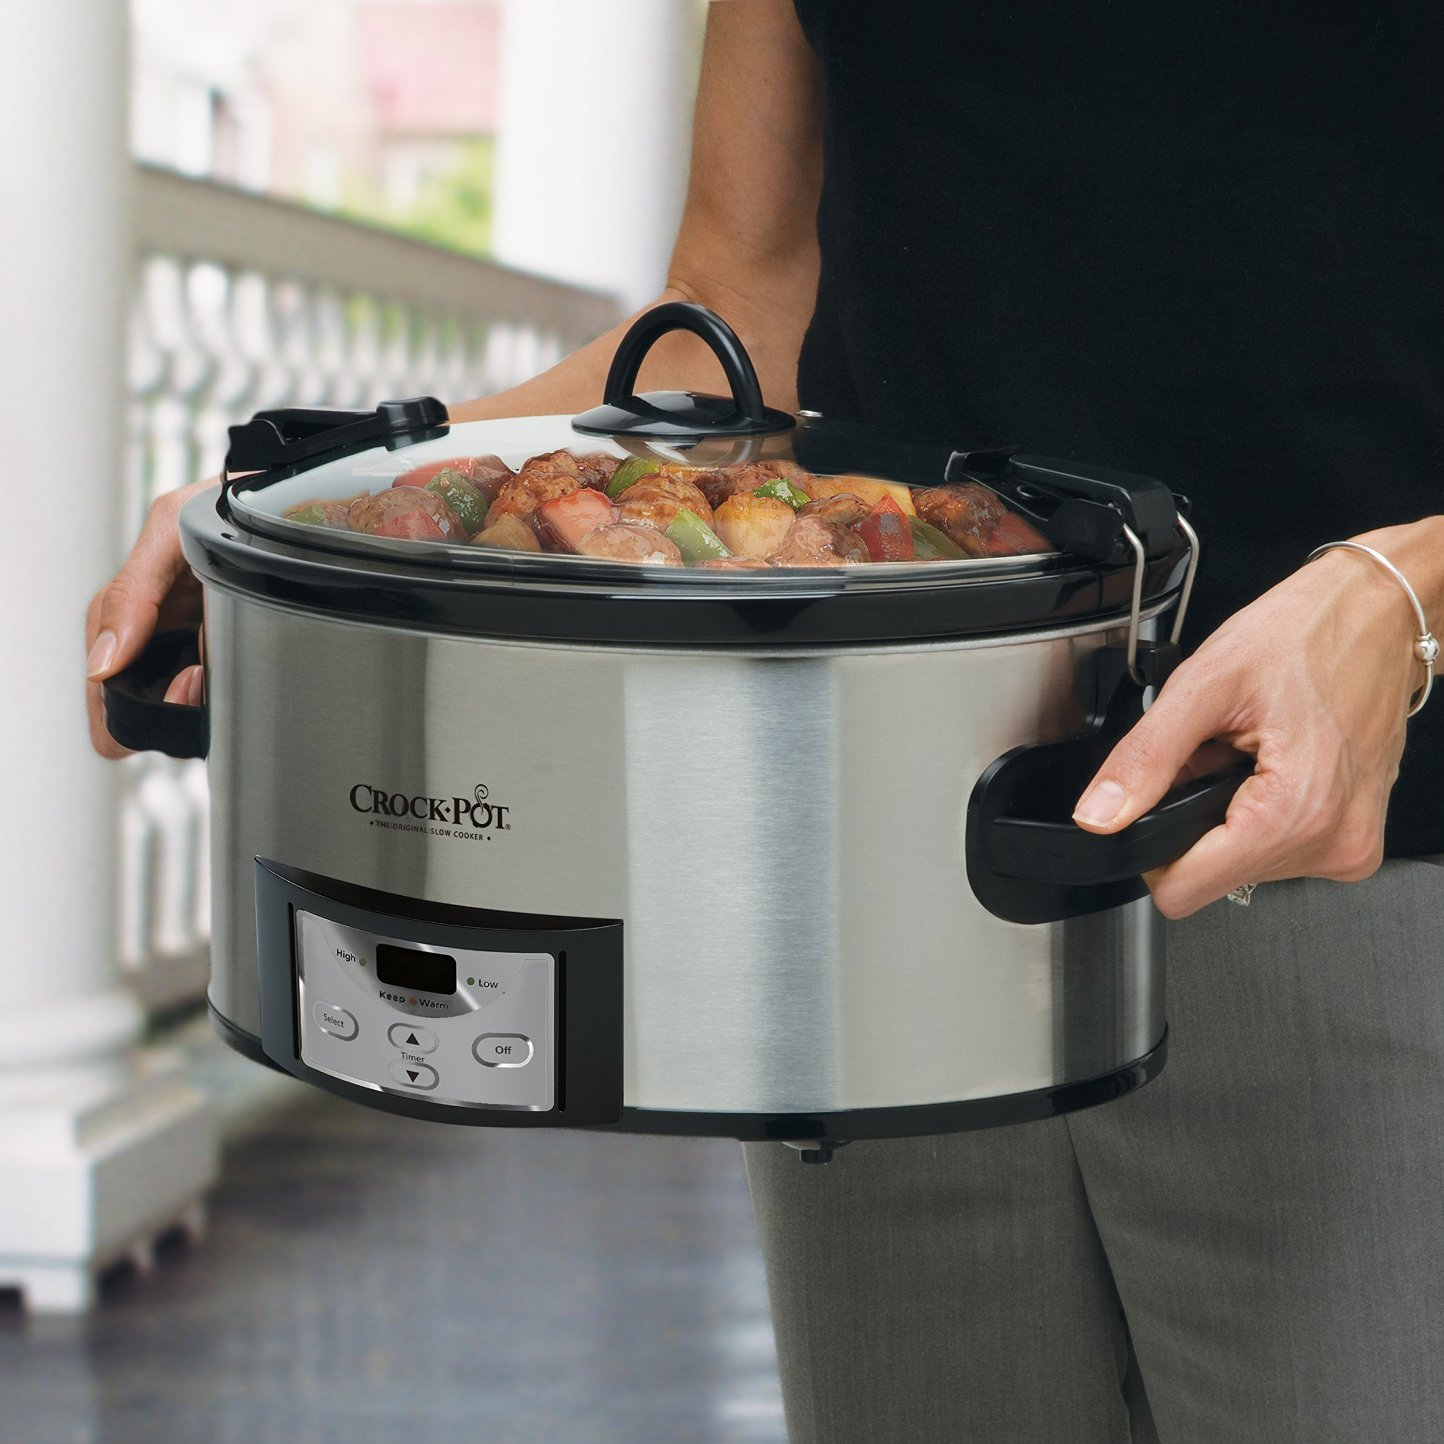 Crock-Pot 6 Quart Programmable Cook and Carry Oval Slow Cooker Only $34.30!